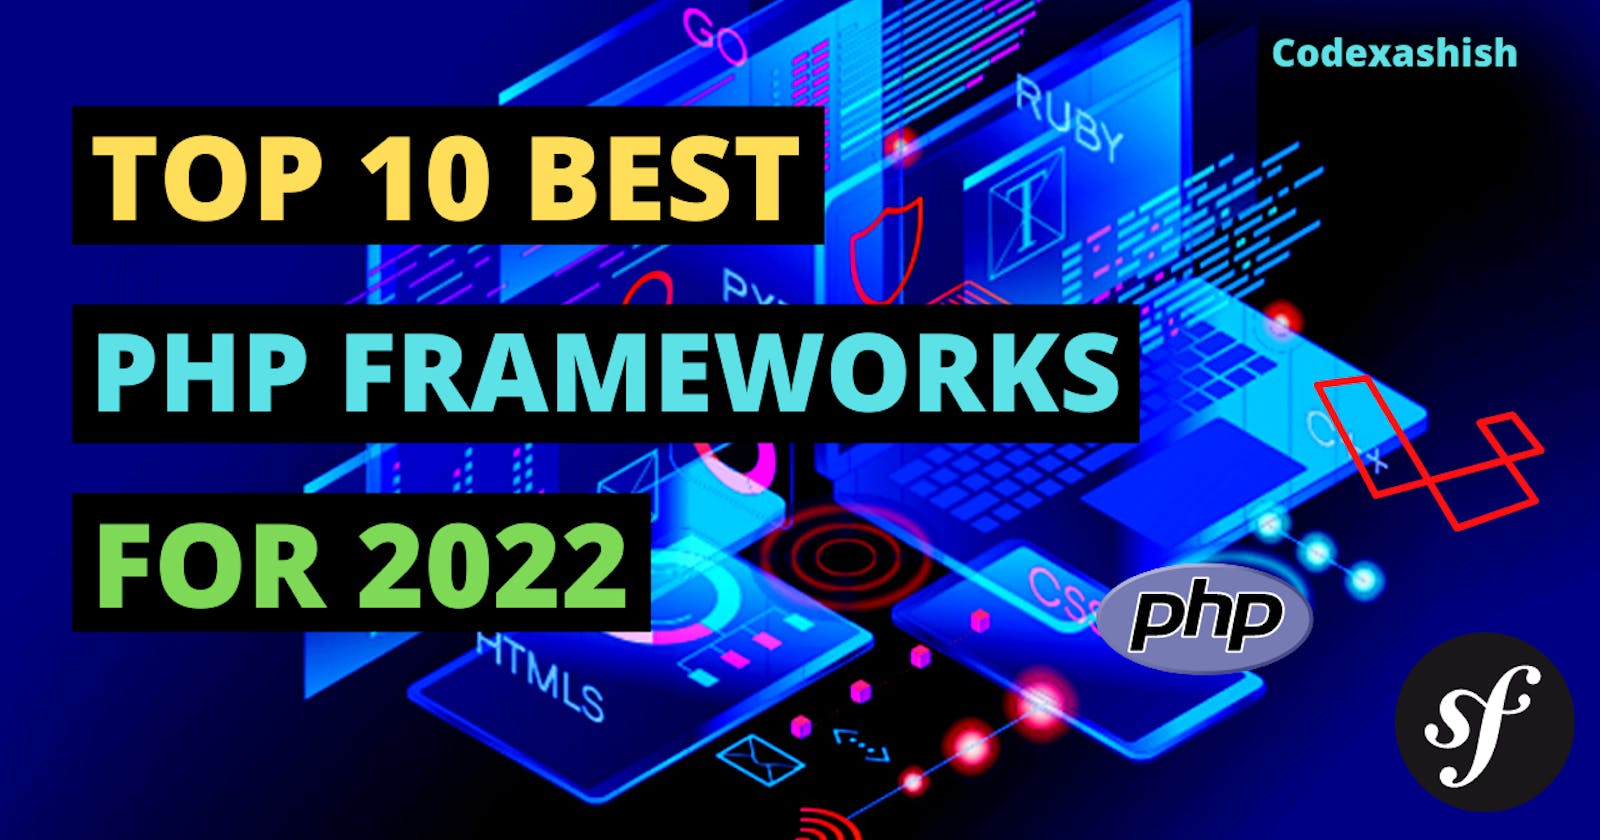 Top 10 Most Popular PHP Frameworks To Use in 2022